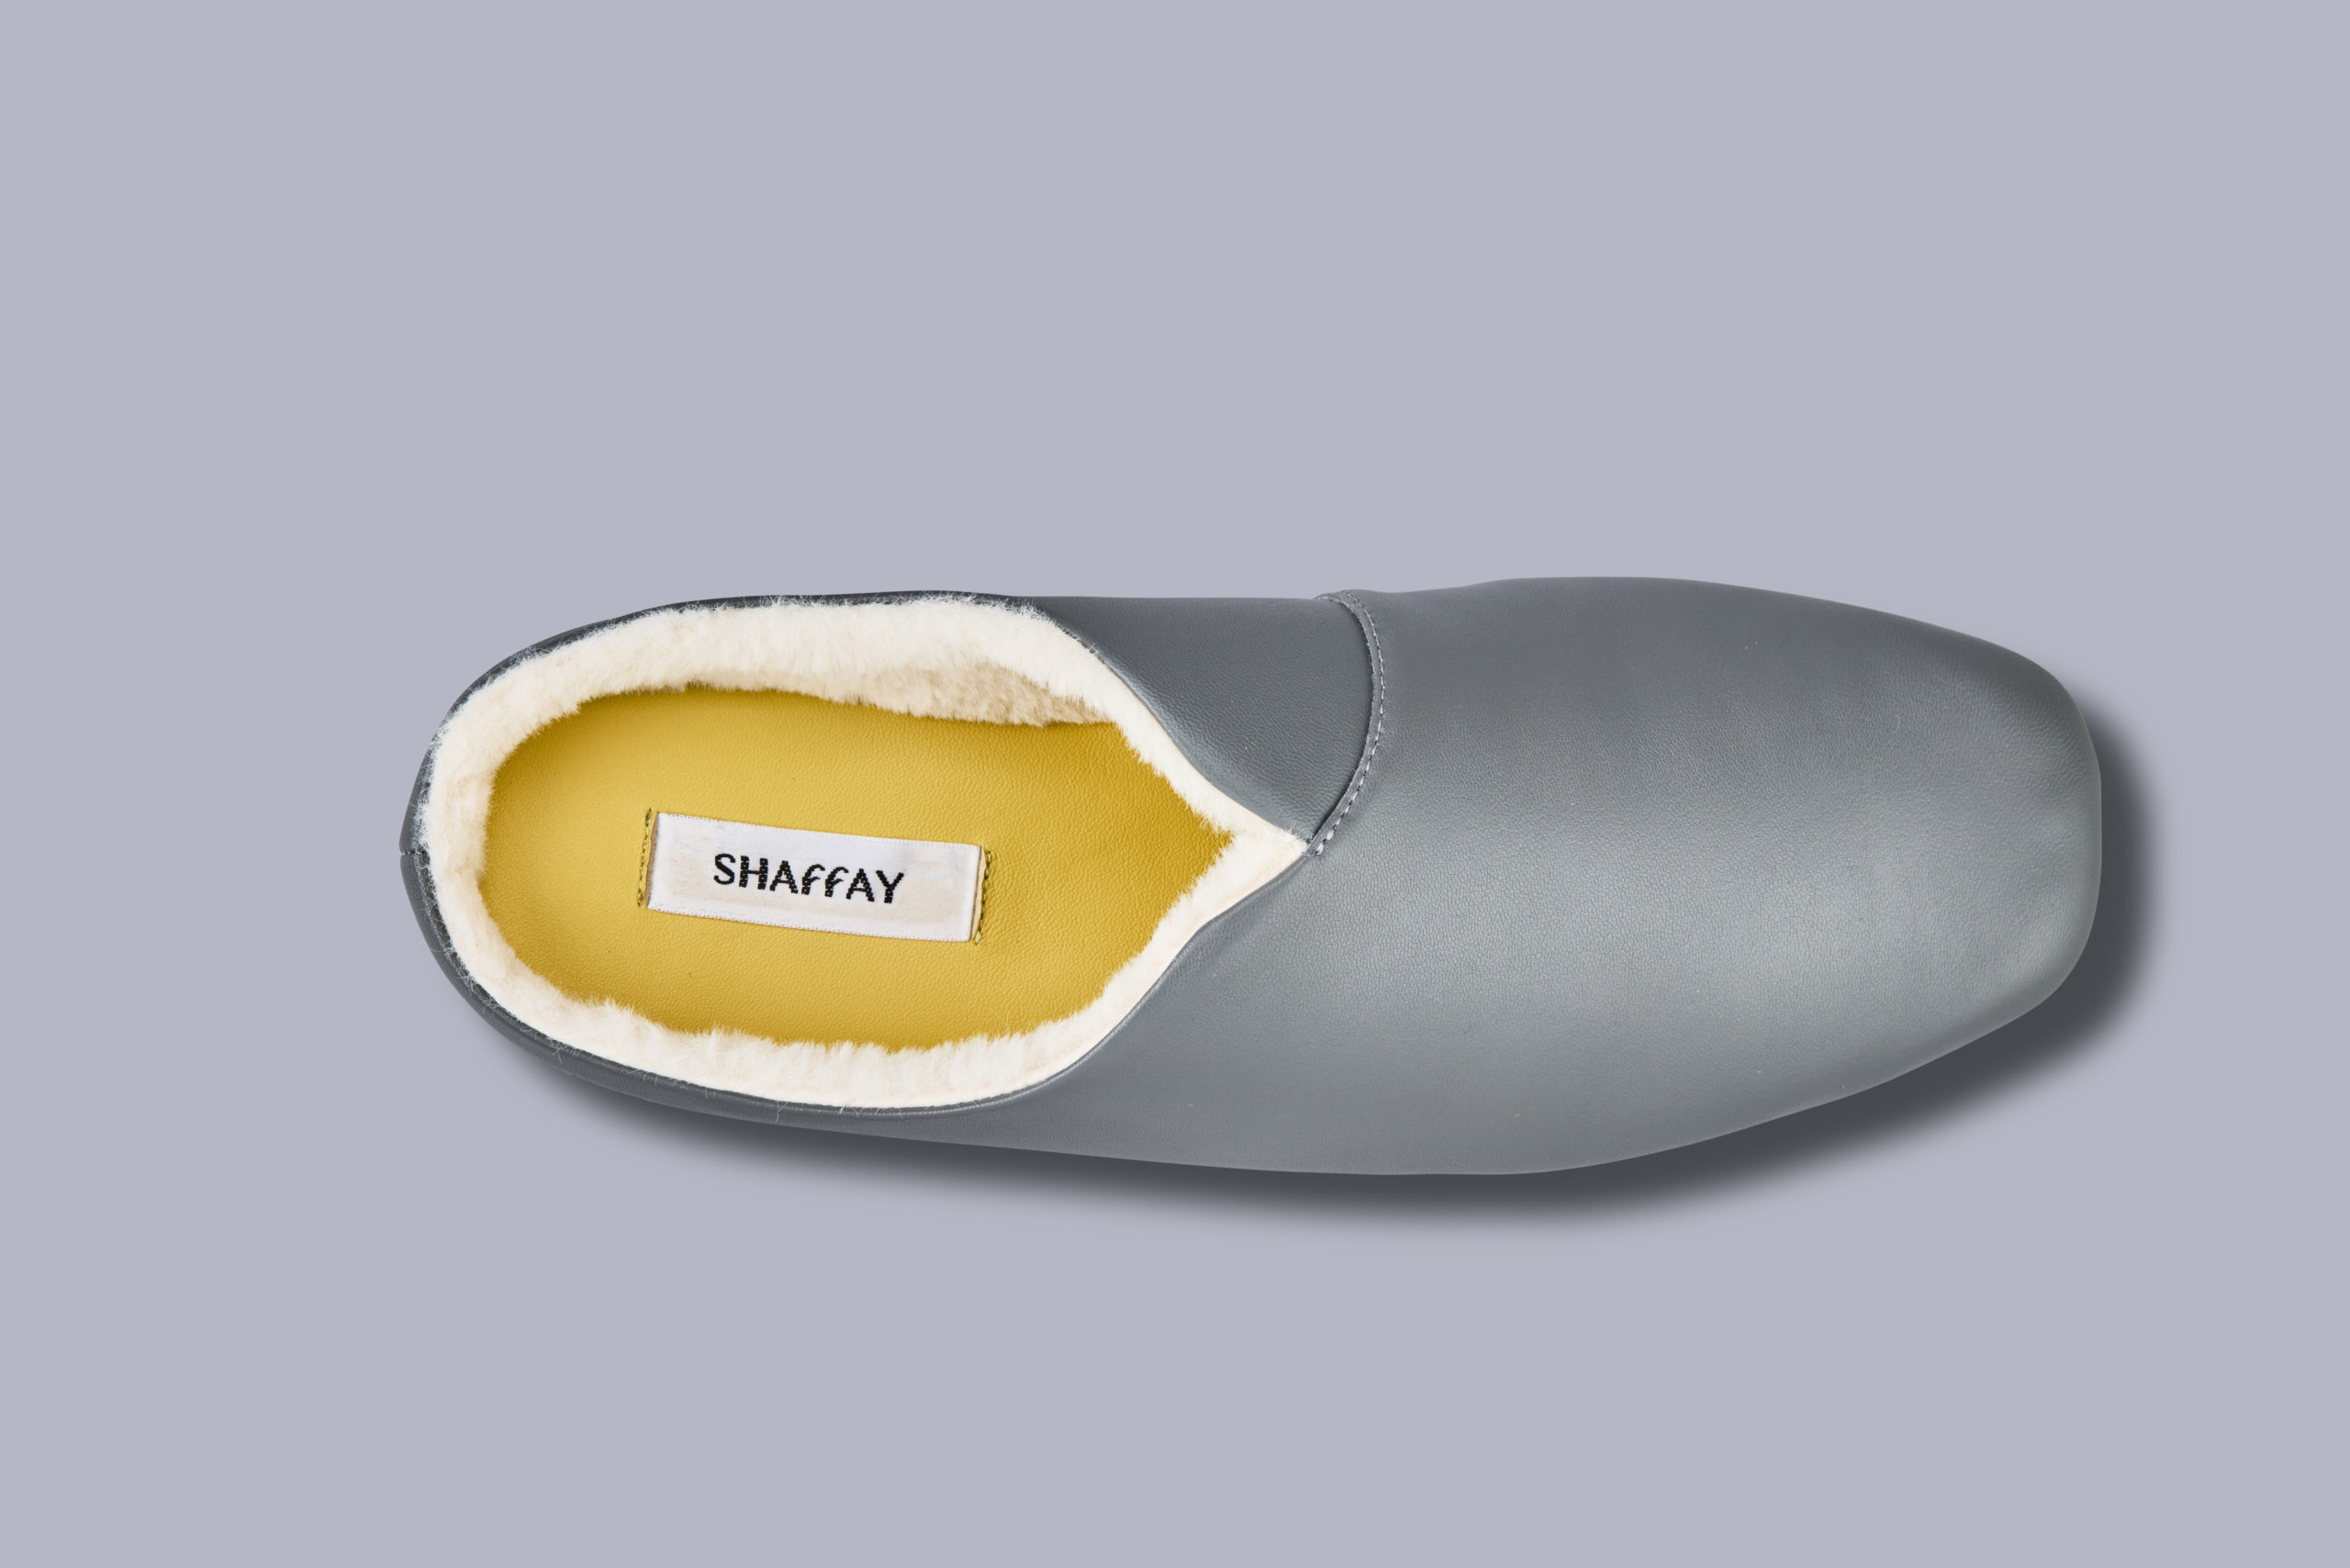 The London luxury slippers